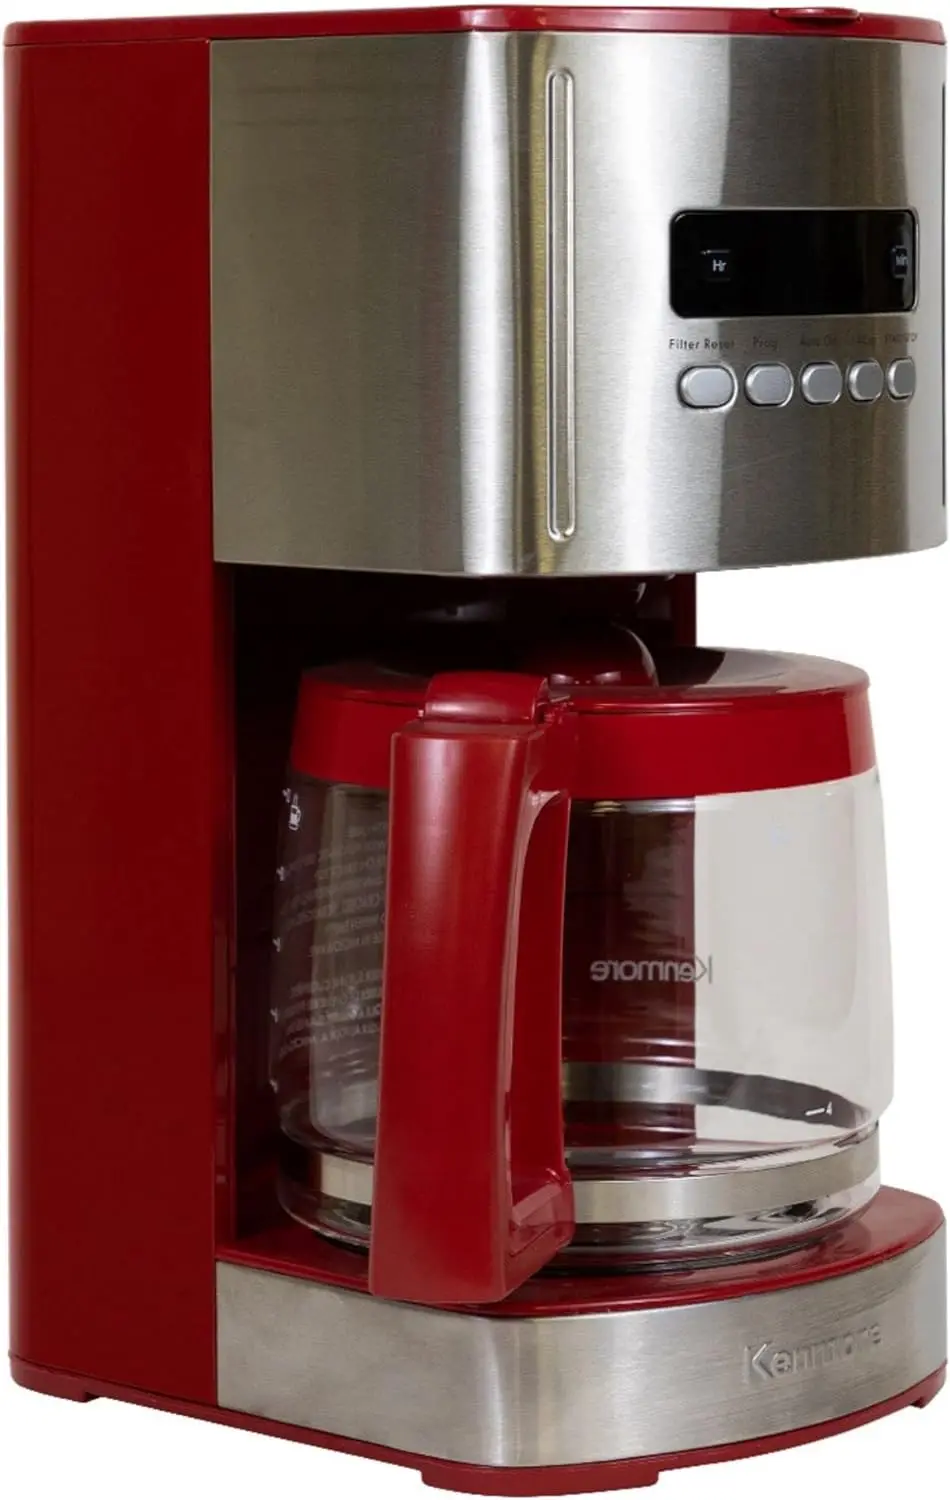 

12-Cup Programmable Maker, Red and Stainless Steel Drip Machine, Glass Carafe, Reusable Filter, Timer, Digital Display Charcoa